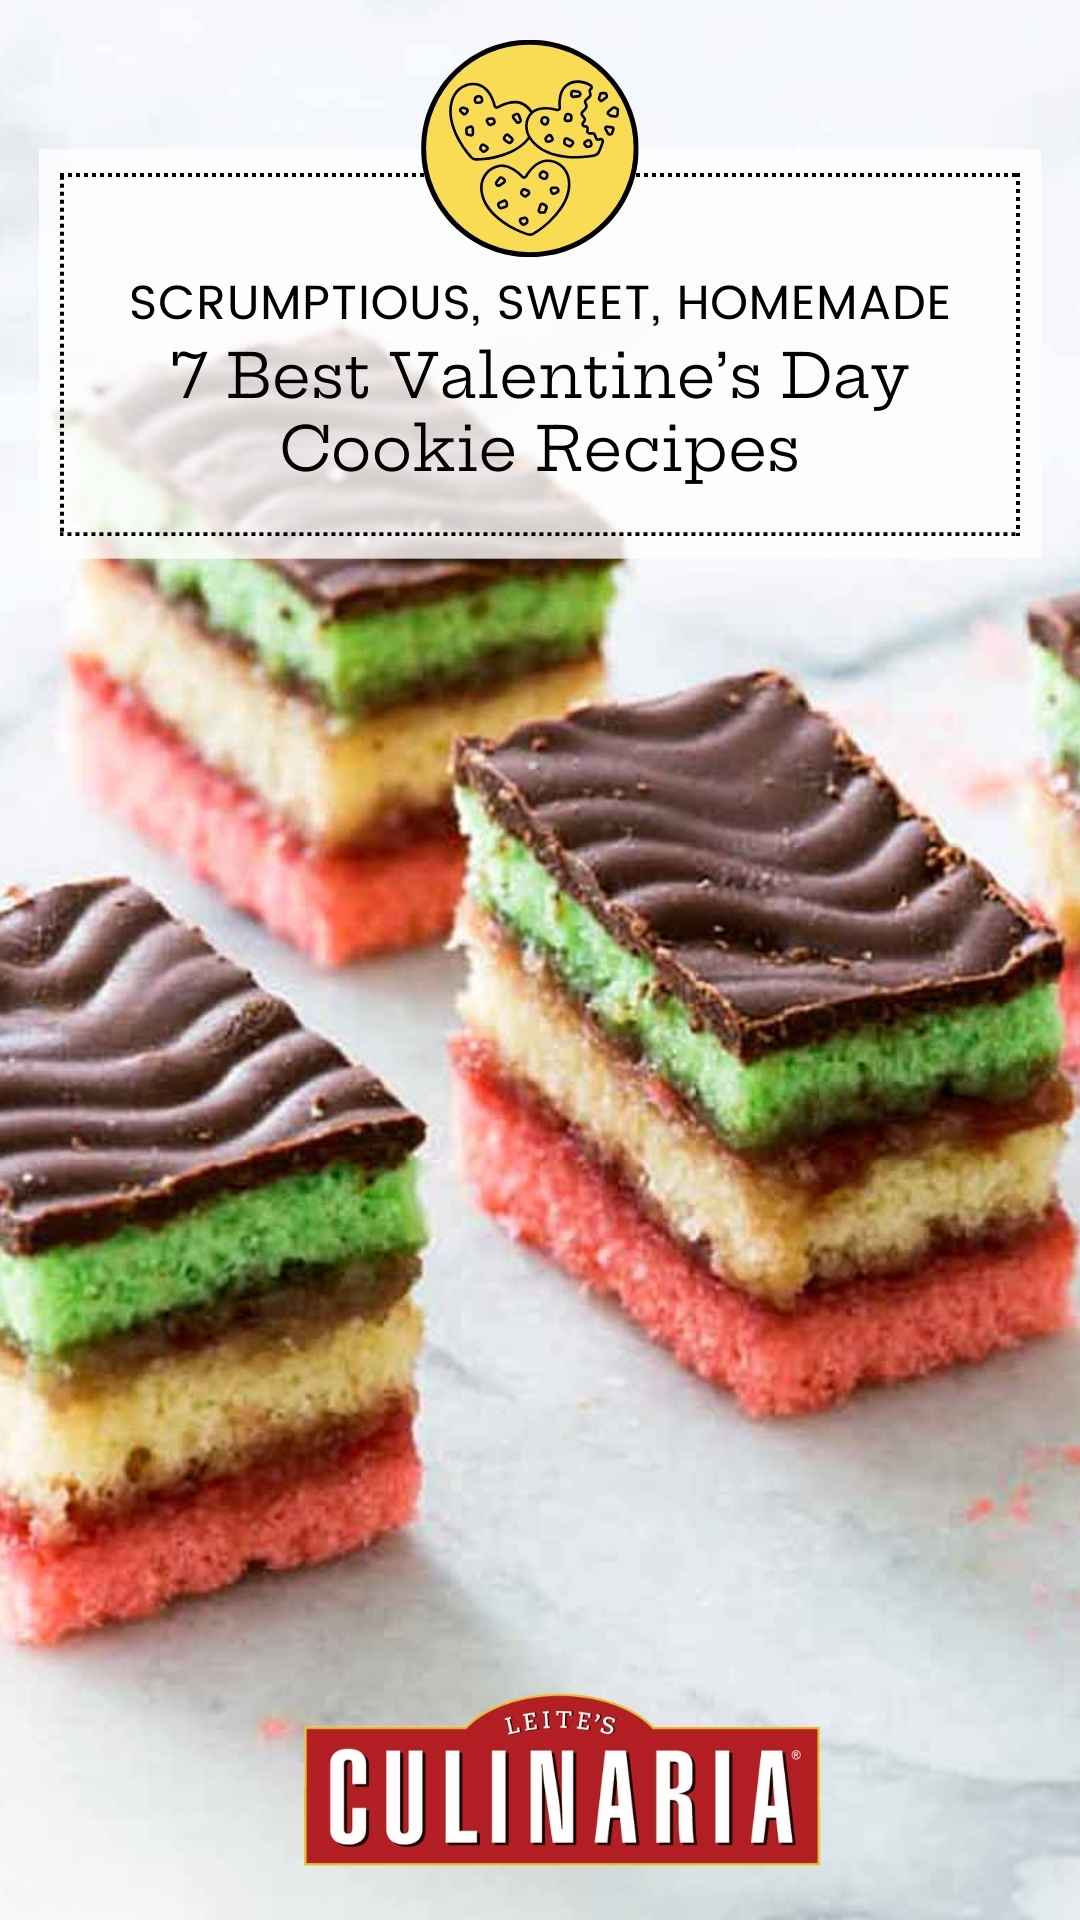 Several layered Italian rainbow cookies topped with chocolate on a marble surface.